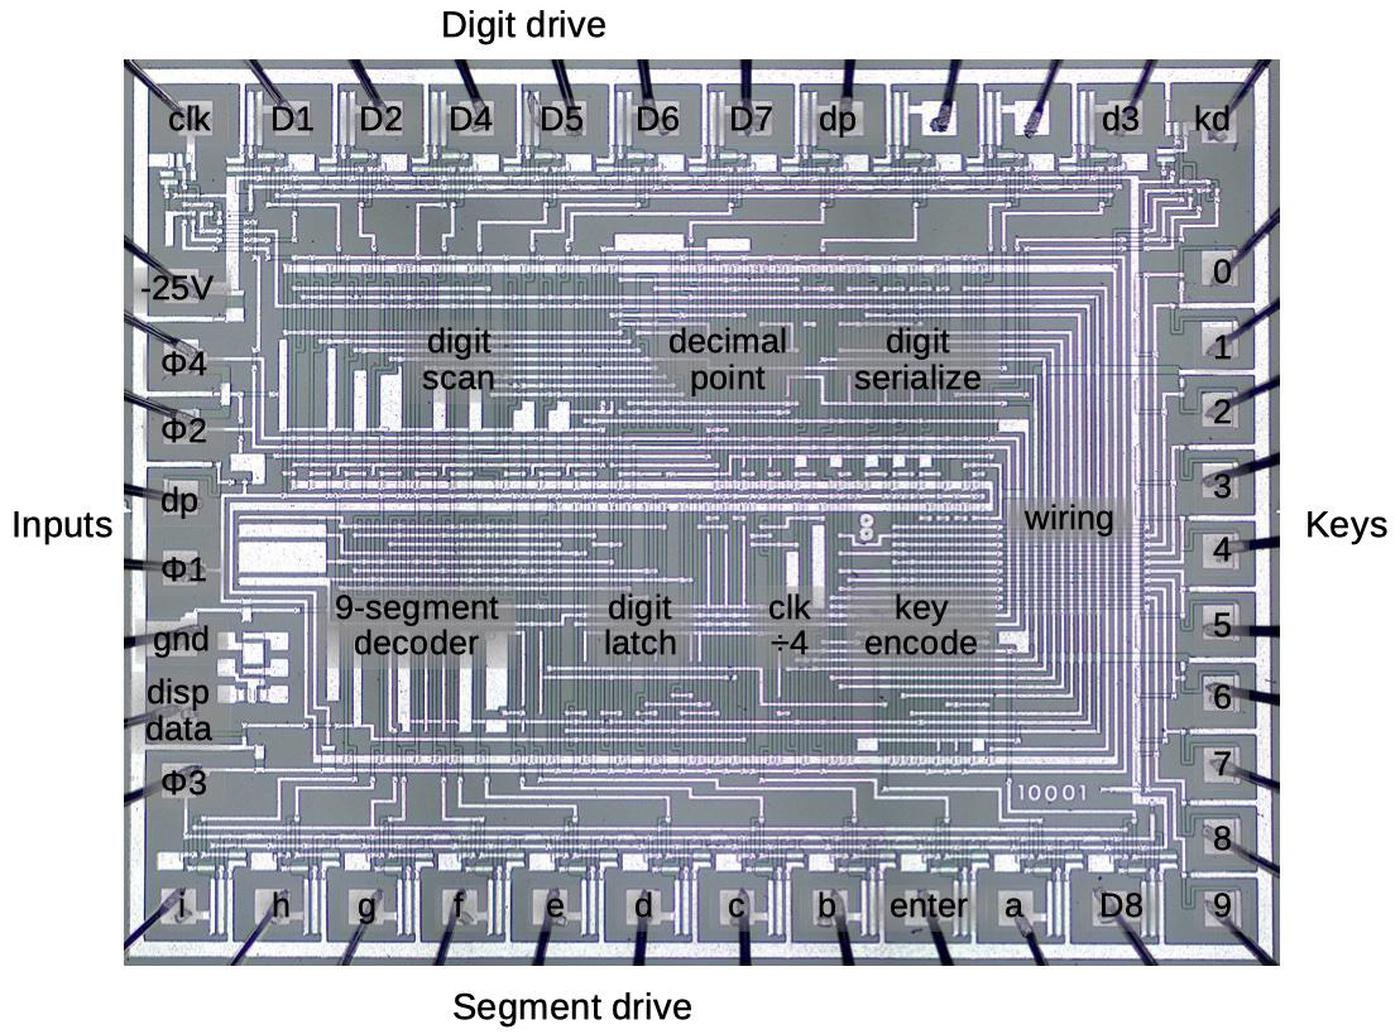 The die of the NRD2256 keypad/display chip with the functional blocks labeled.